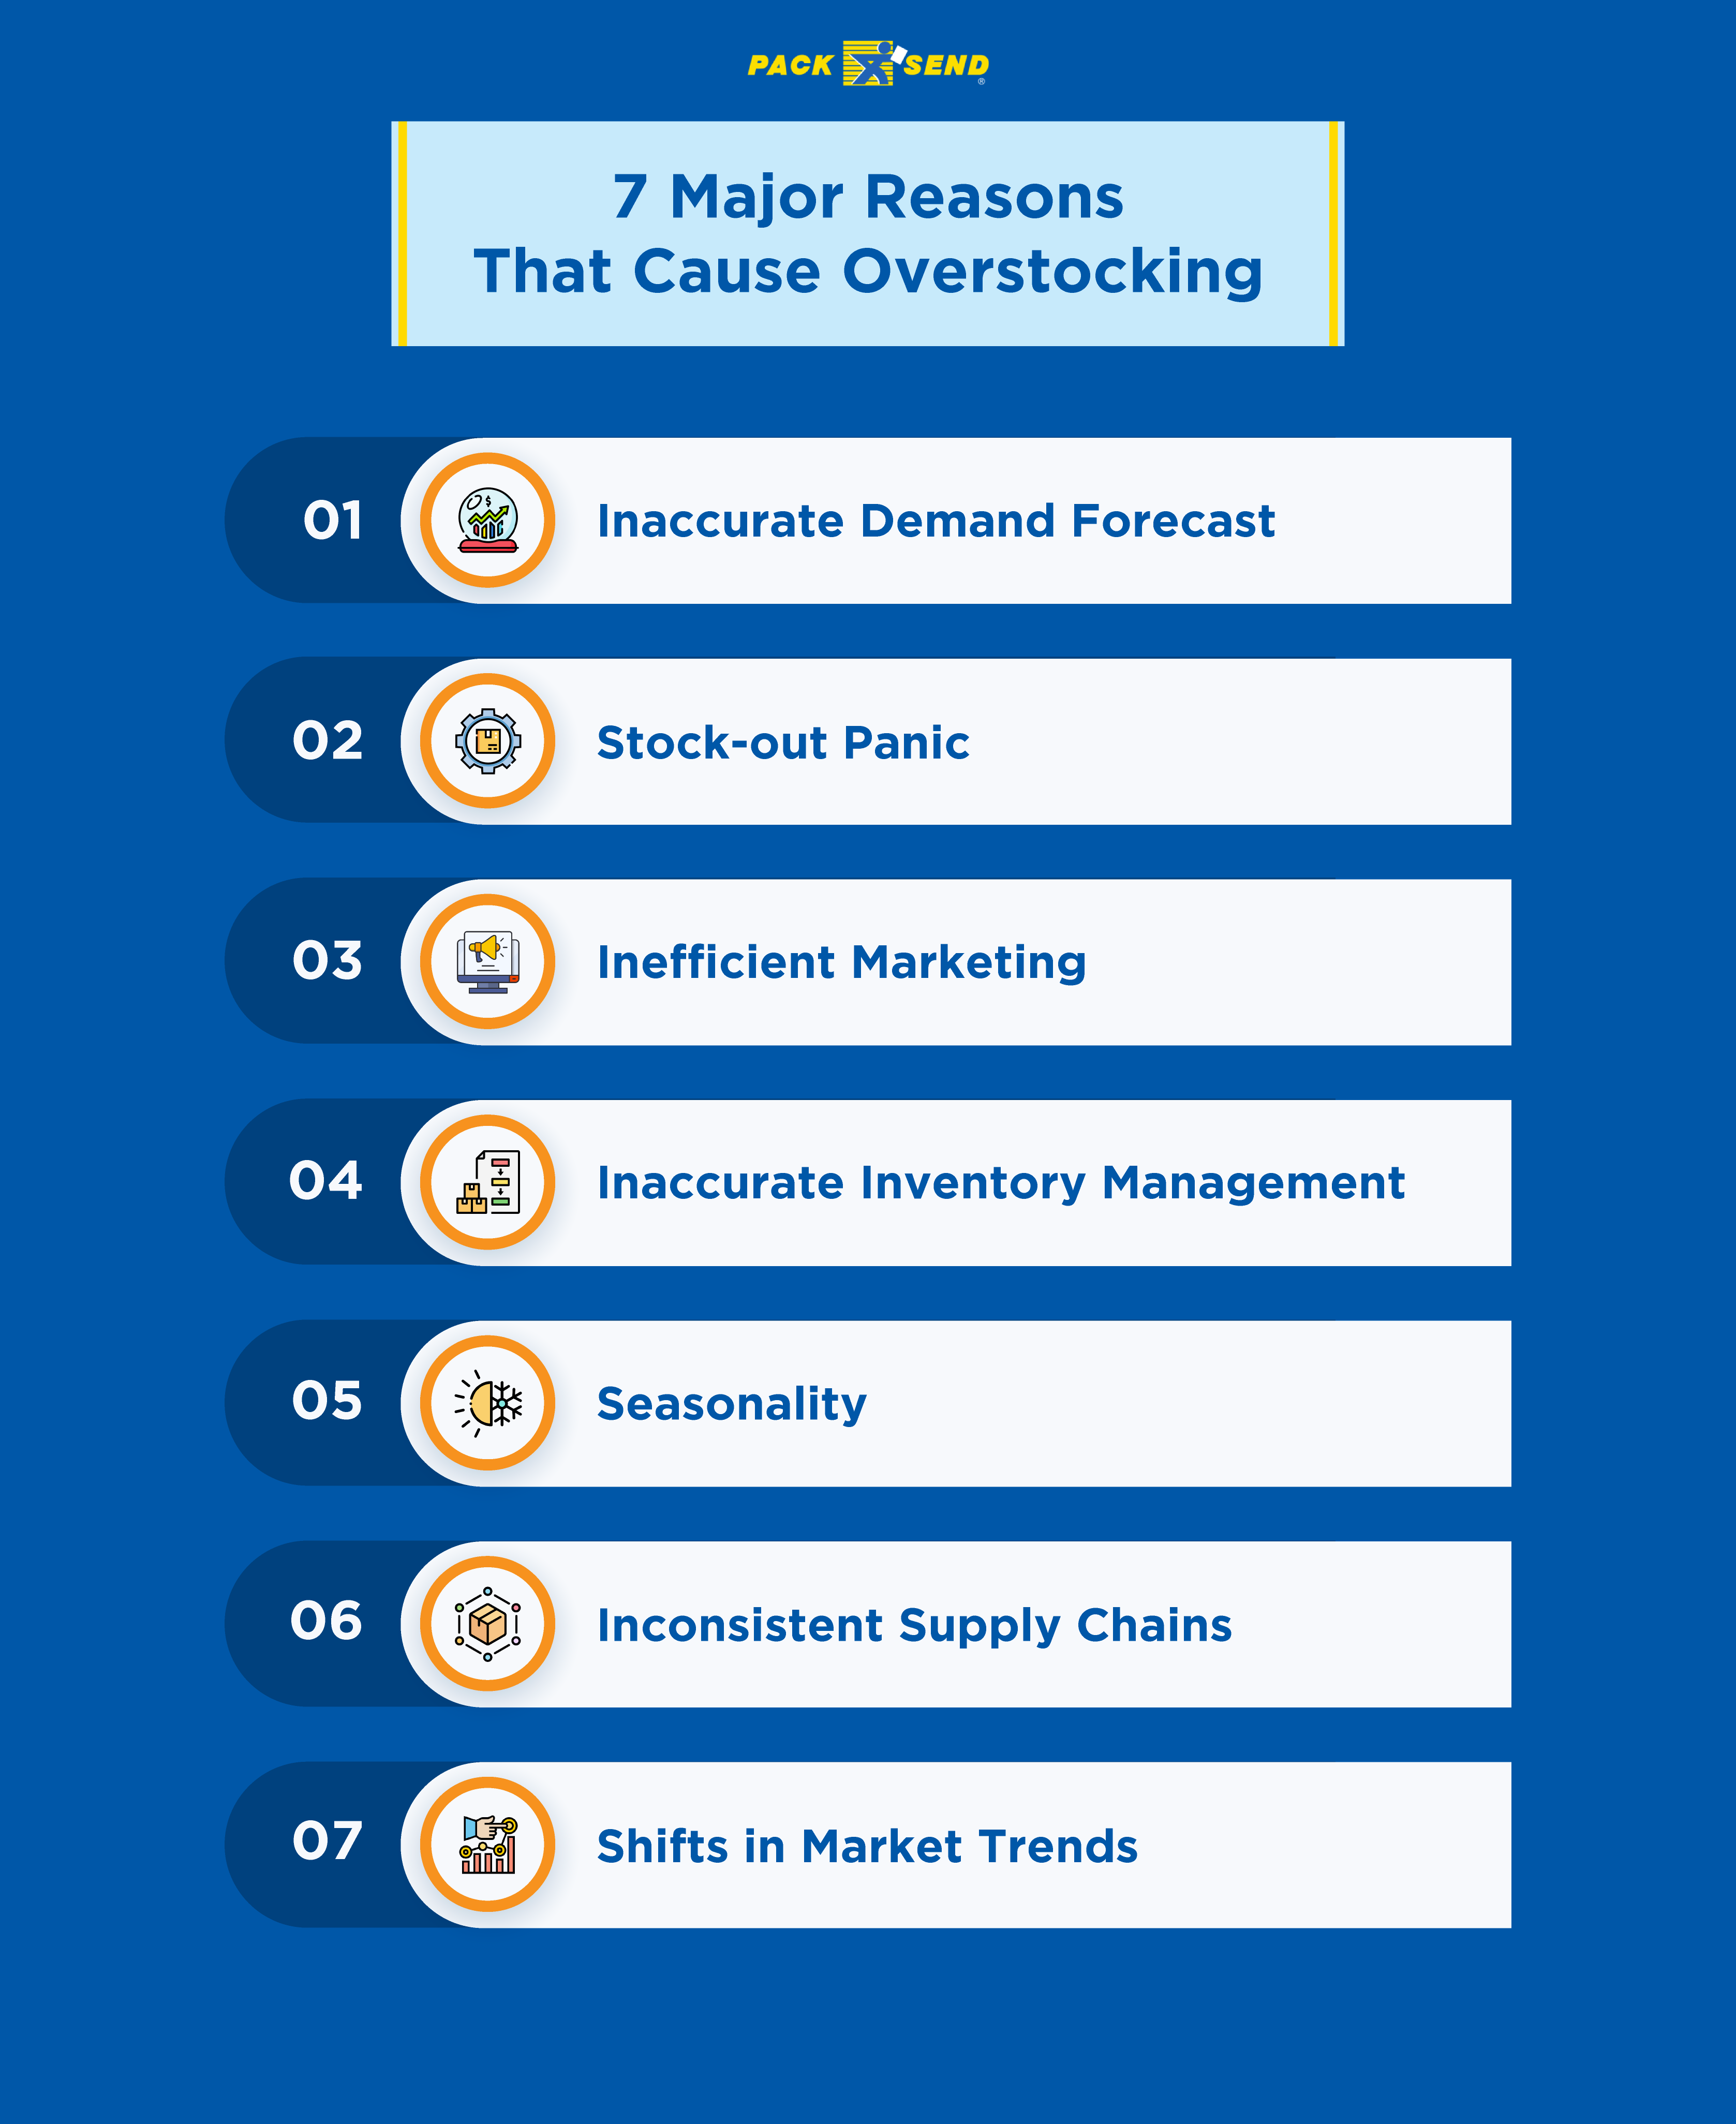 7 major reasons of overstocking.